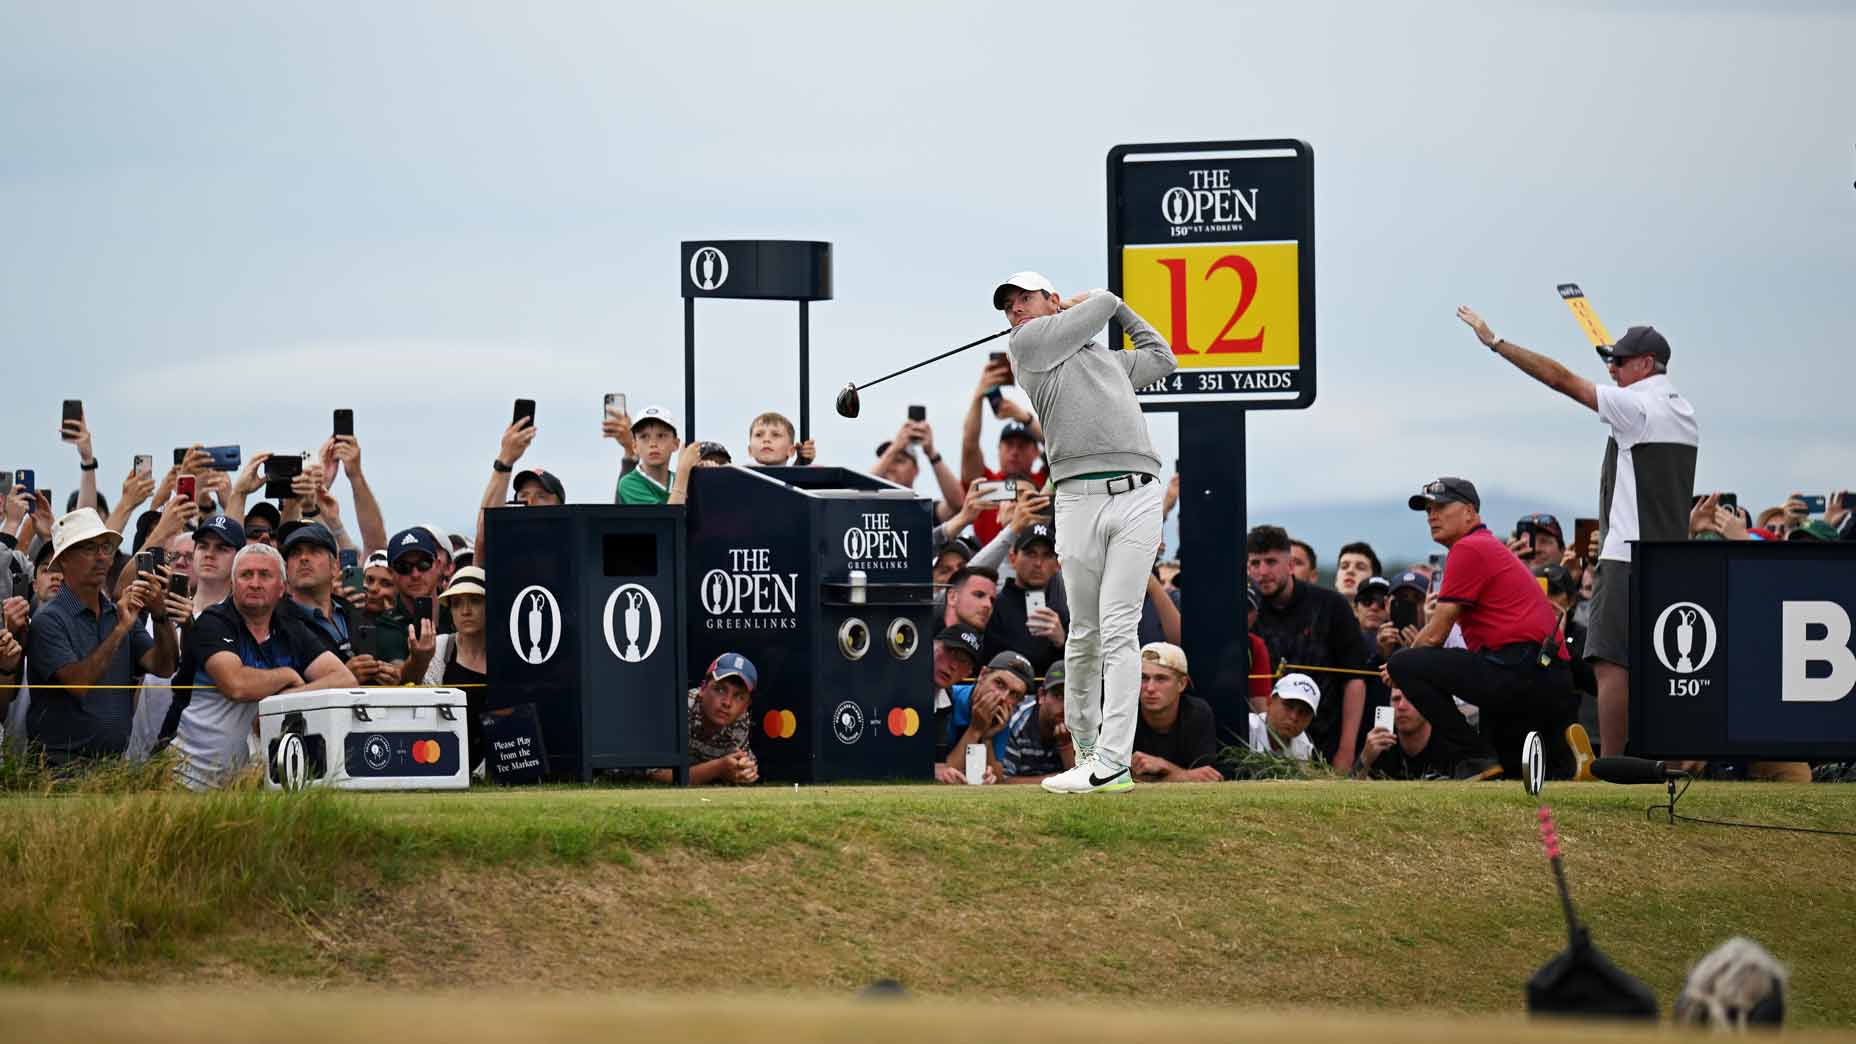 How to watch the Open Championship on Sunday Round 4 live coverage